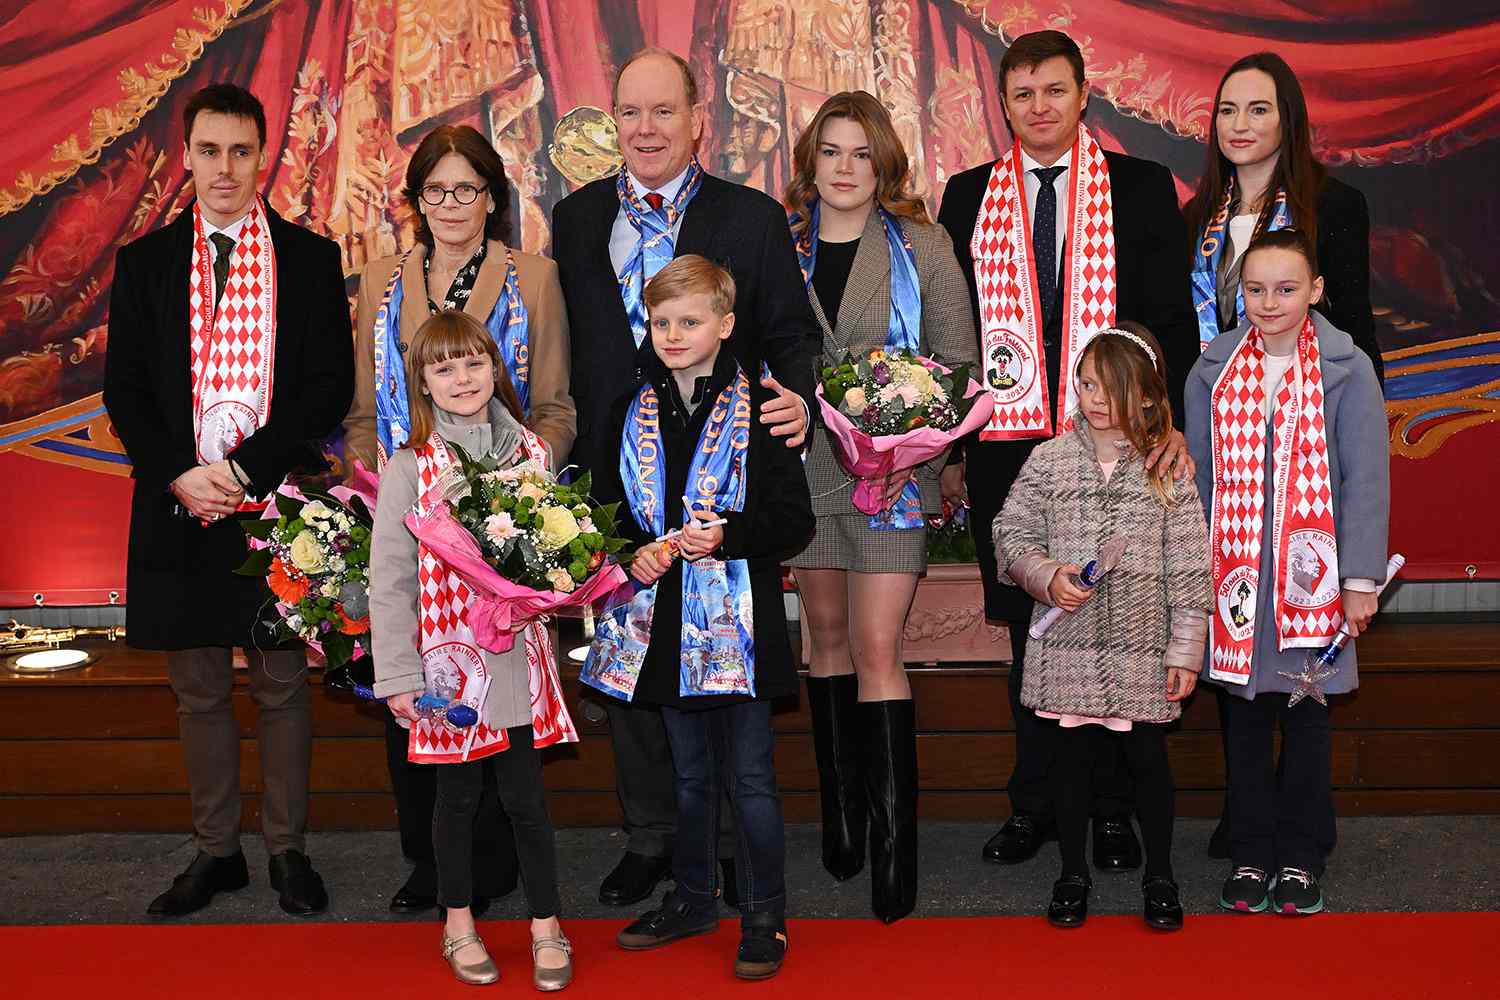 Louis Ducruet, Princess Stephanie of Monaco, Princess Gabriella of Monaco, Prince Albert II of Monaco, Prince Jacques of Monaco, Camille Gottlieb, Gareth Wittstock, Roisin Wittsock and their daughters Kaia Rose and Bodie attend the 46th International Circus Festival 